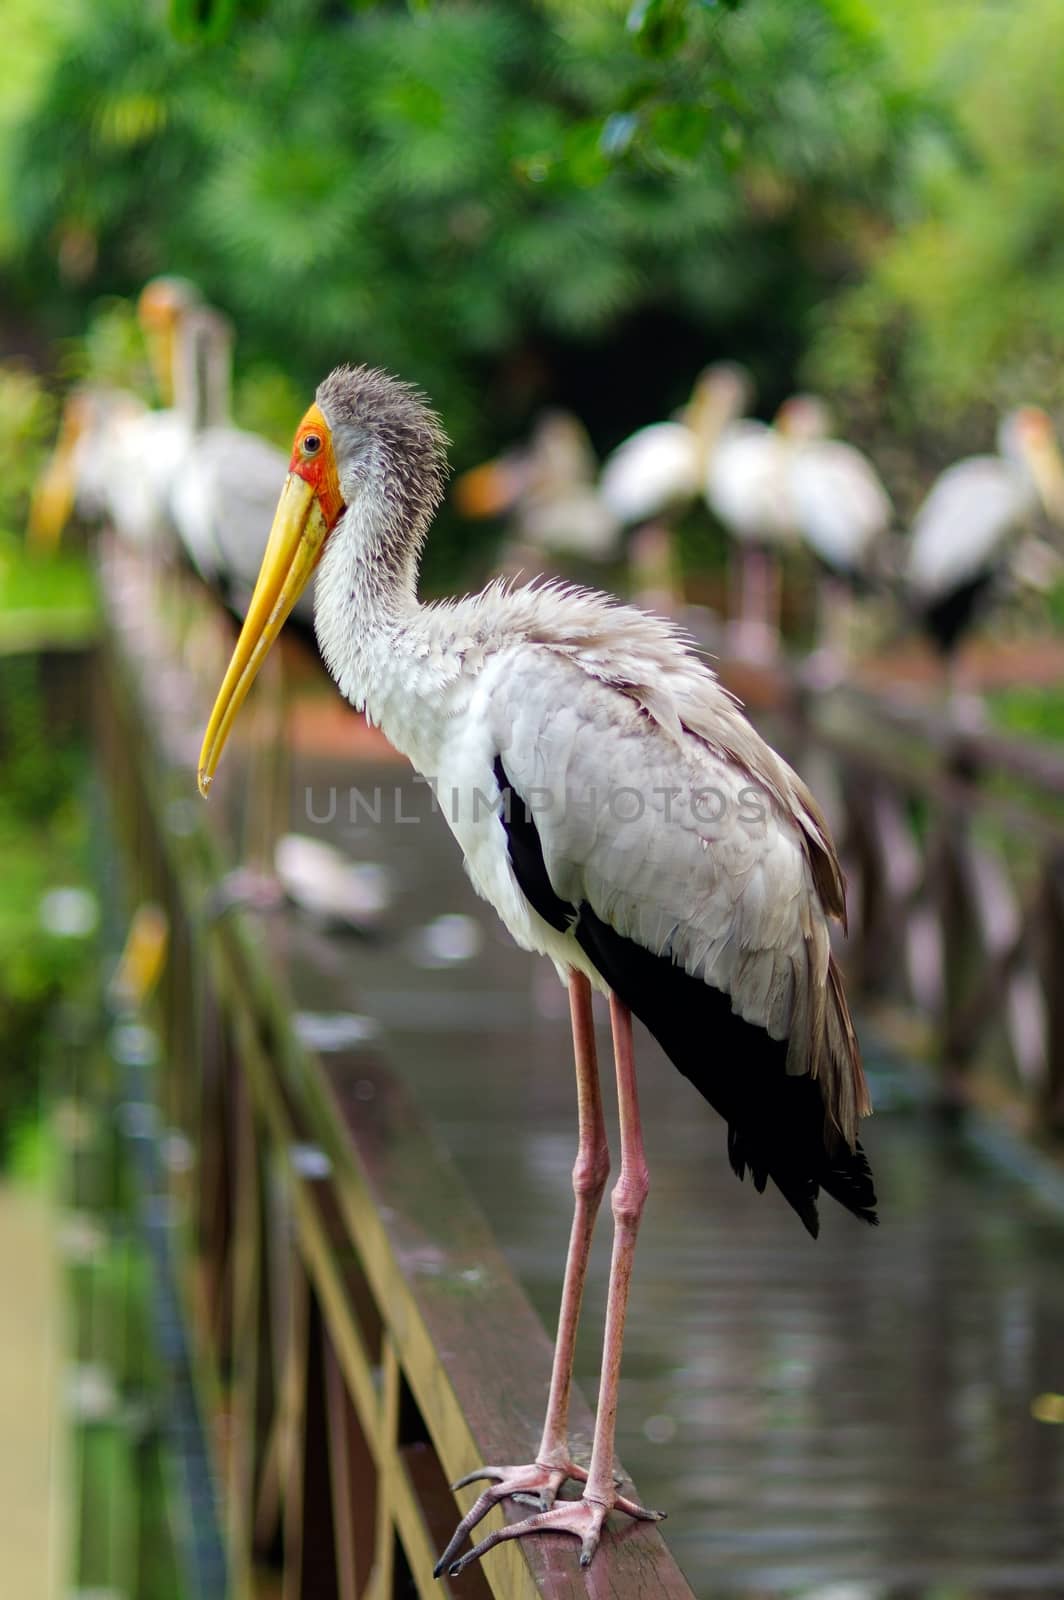 lot of white storks sitting on bridge railings, ciconia, at rainy day. by evolutionnow